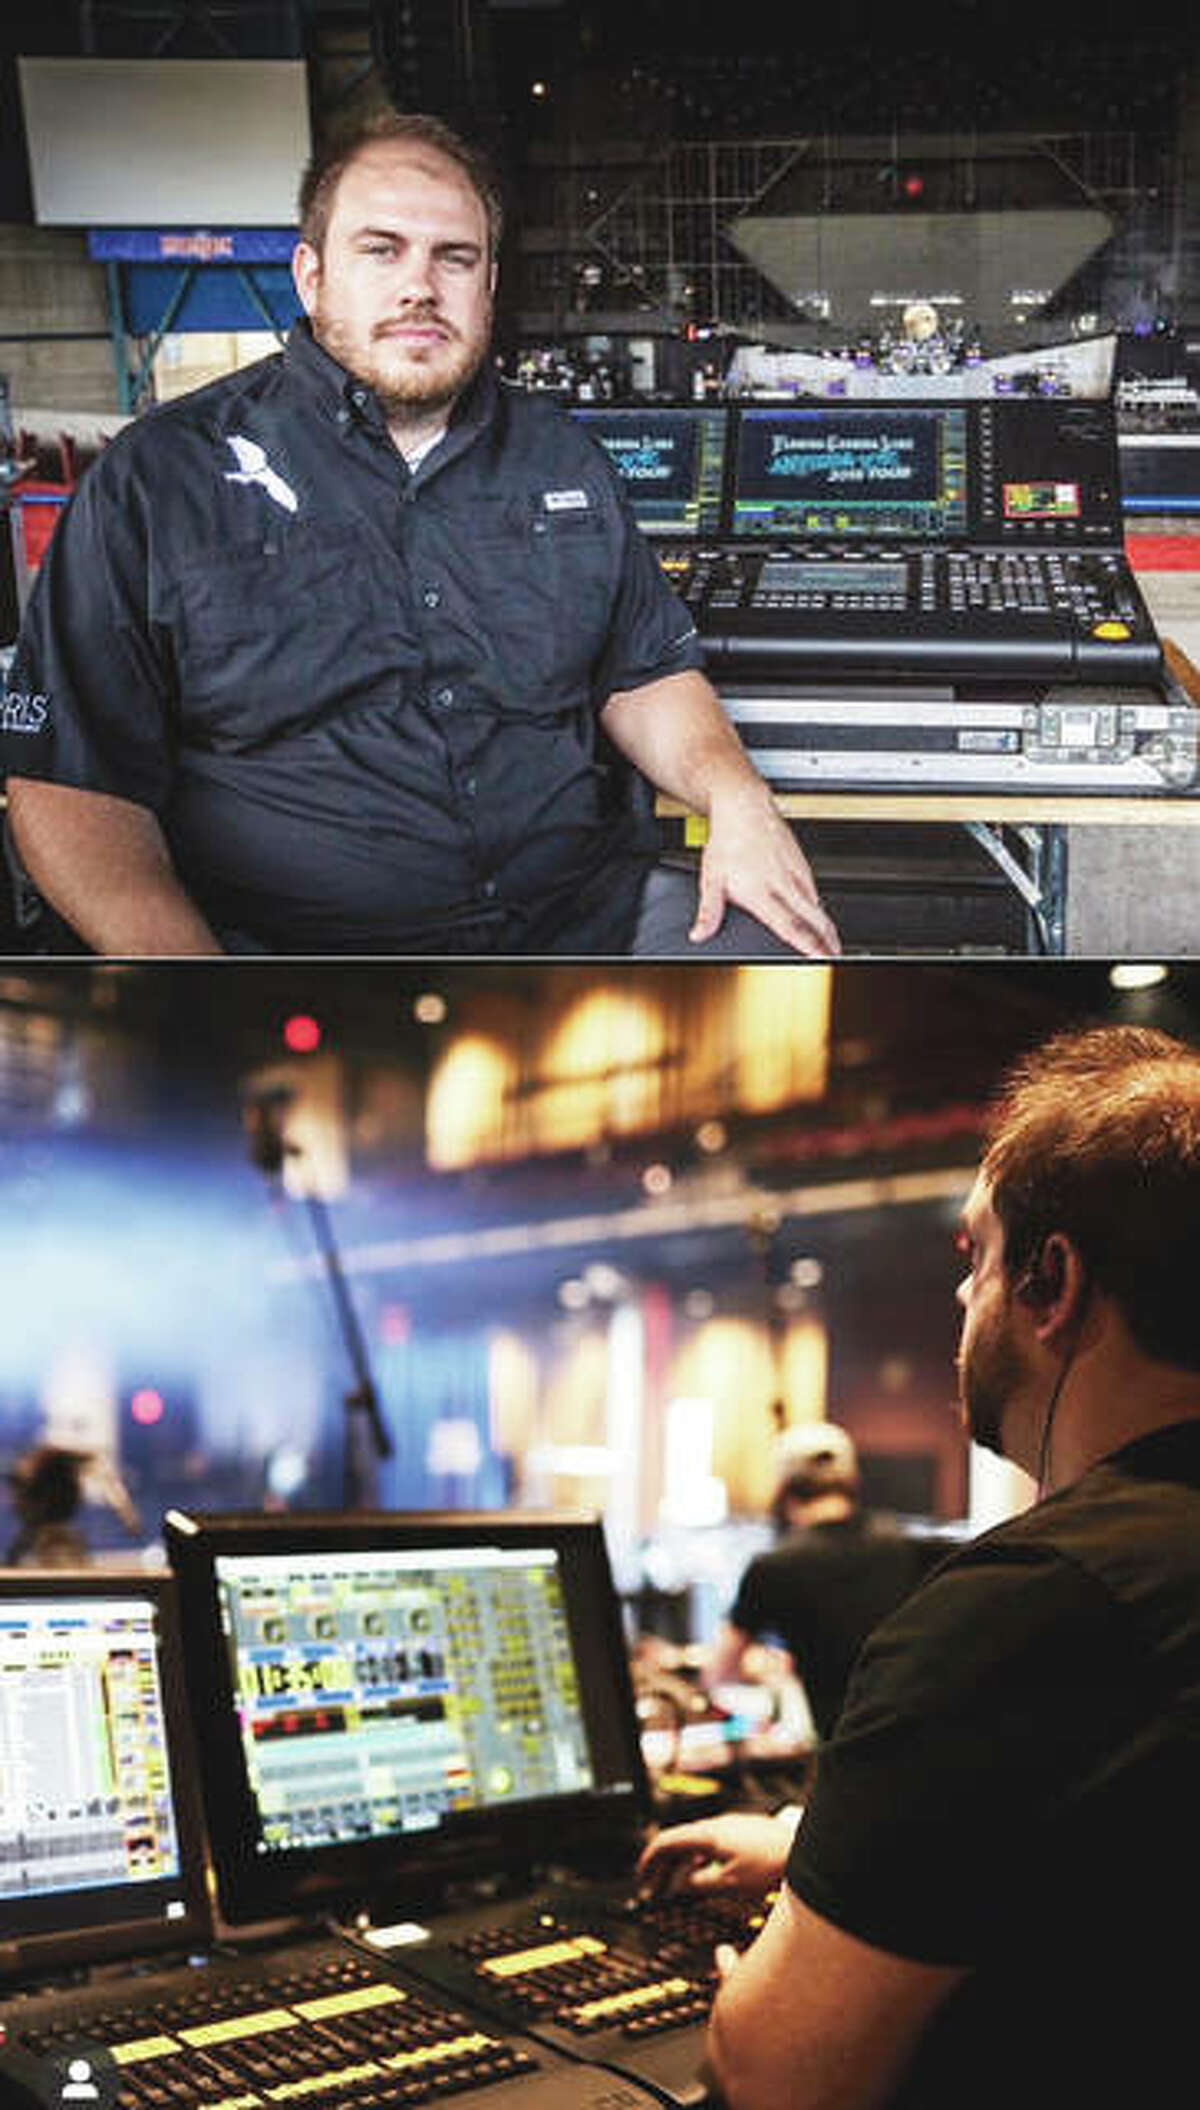 Carrollton native Scott Cunningham is the lighting director for the country music duo Florida Georgia Line, normally traveling with them to about 75 shows a year. He also works behind the scenes for other groups.